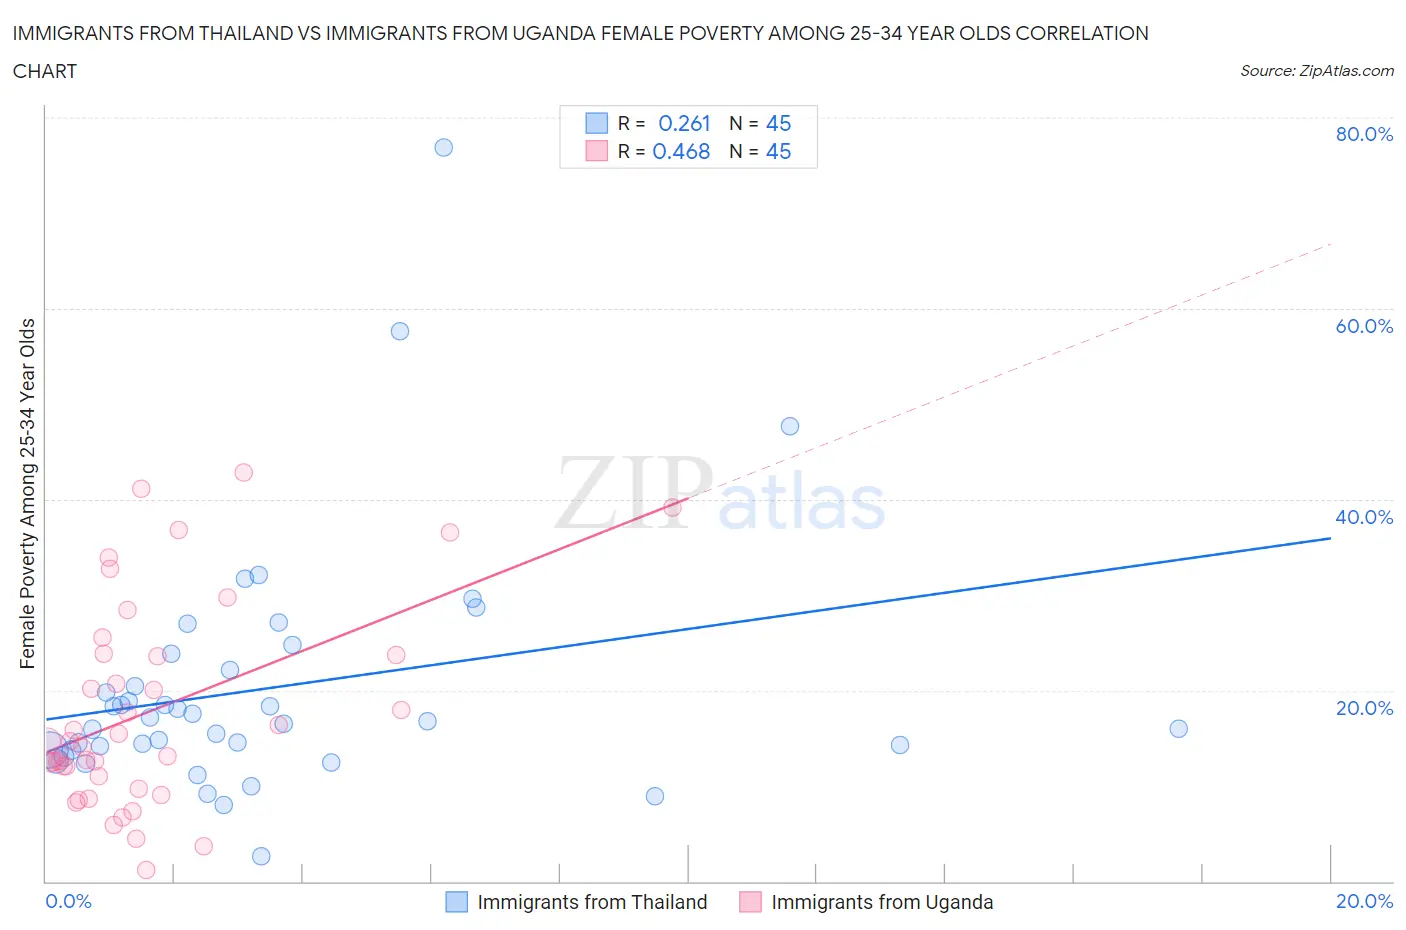 Immigrants from Thailand vs Immigrants from Uganda Female Poverty Among 25-34 Year Olds